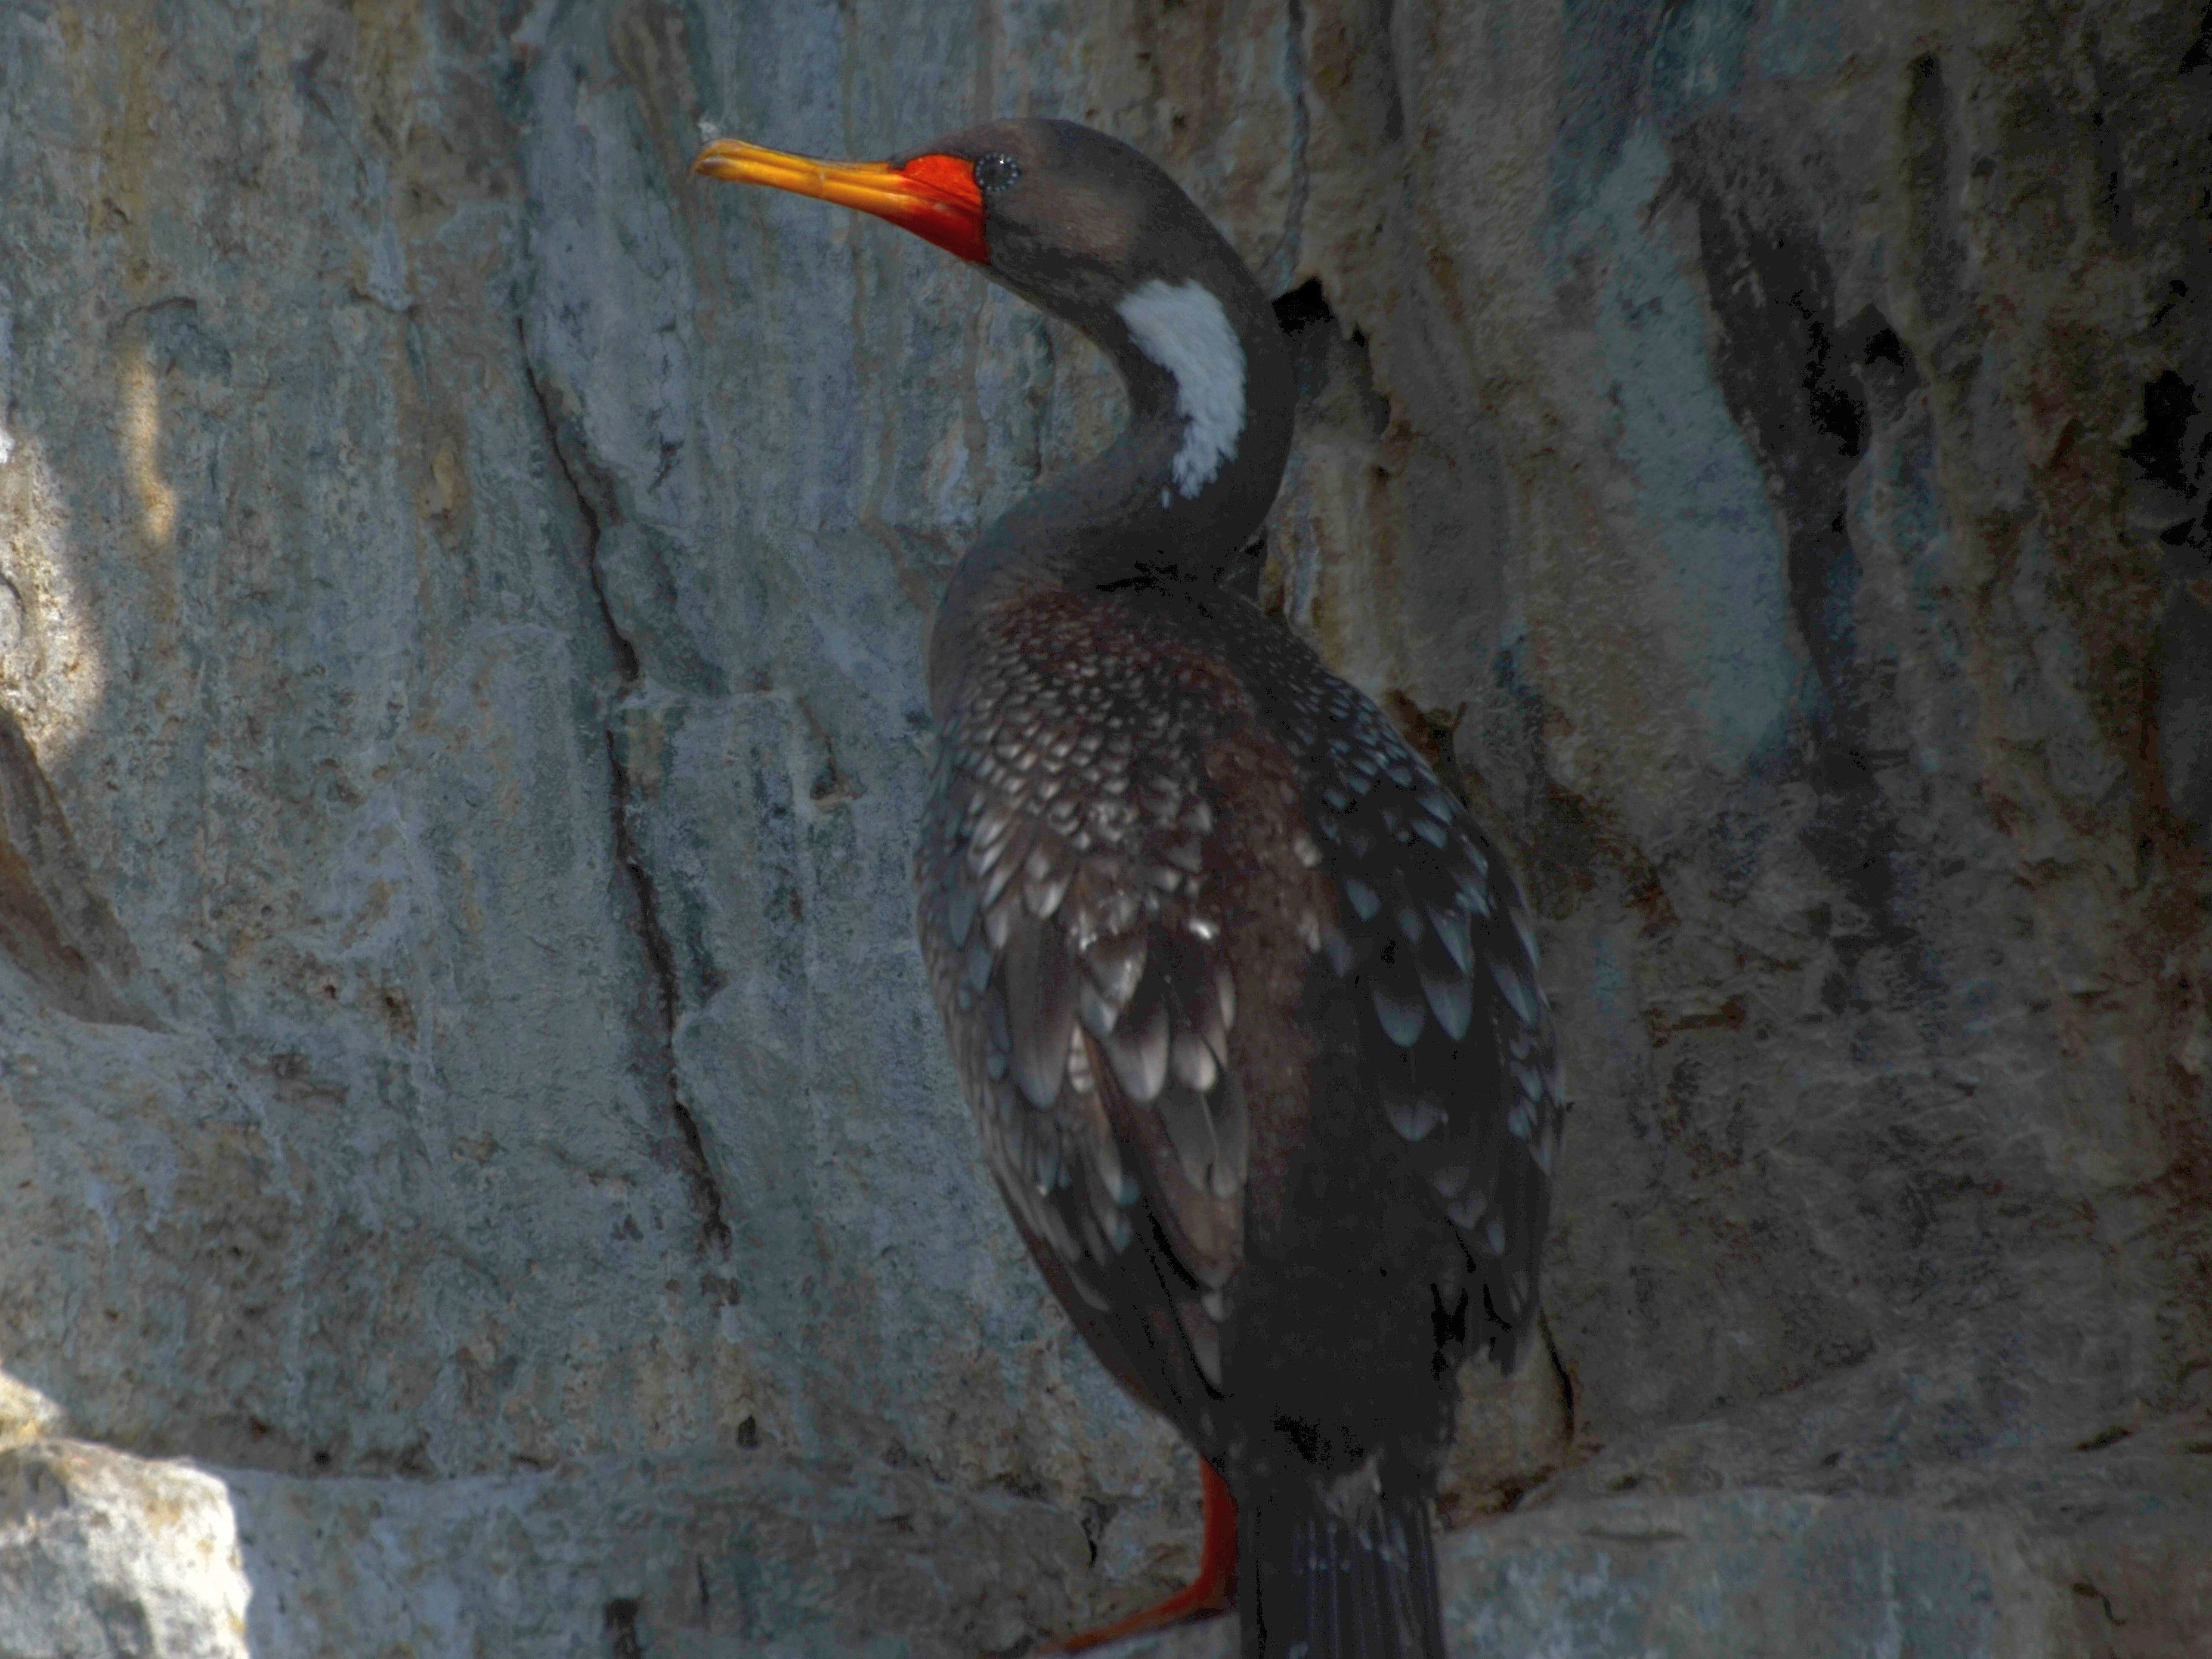 Click picture to see more Red-legged Cormorants.